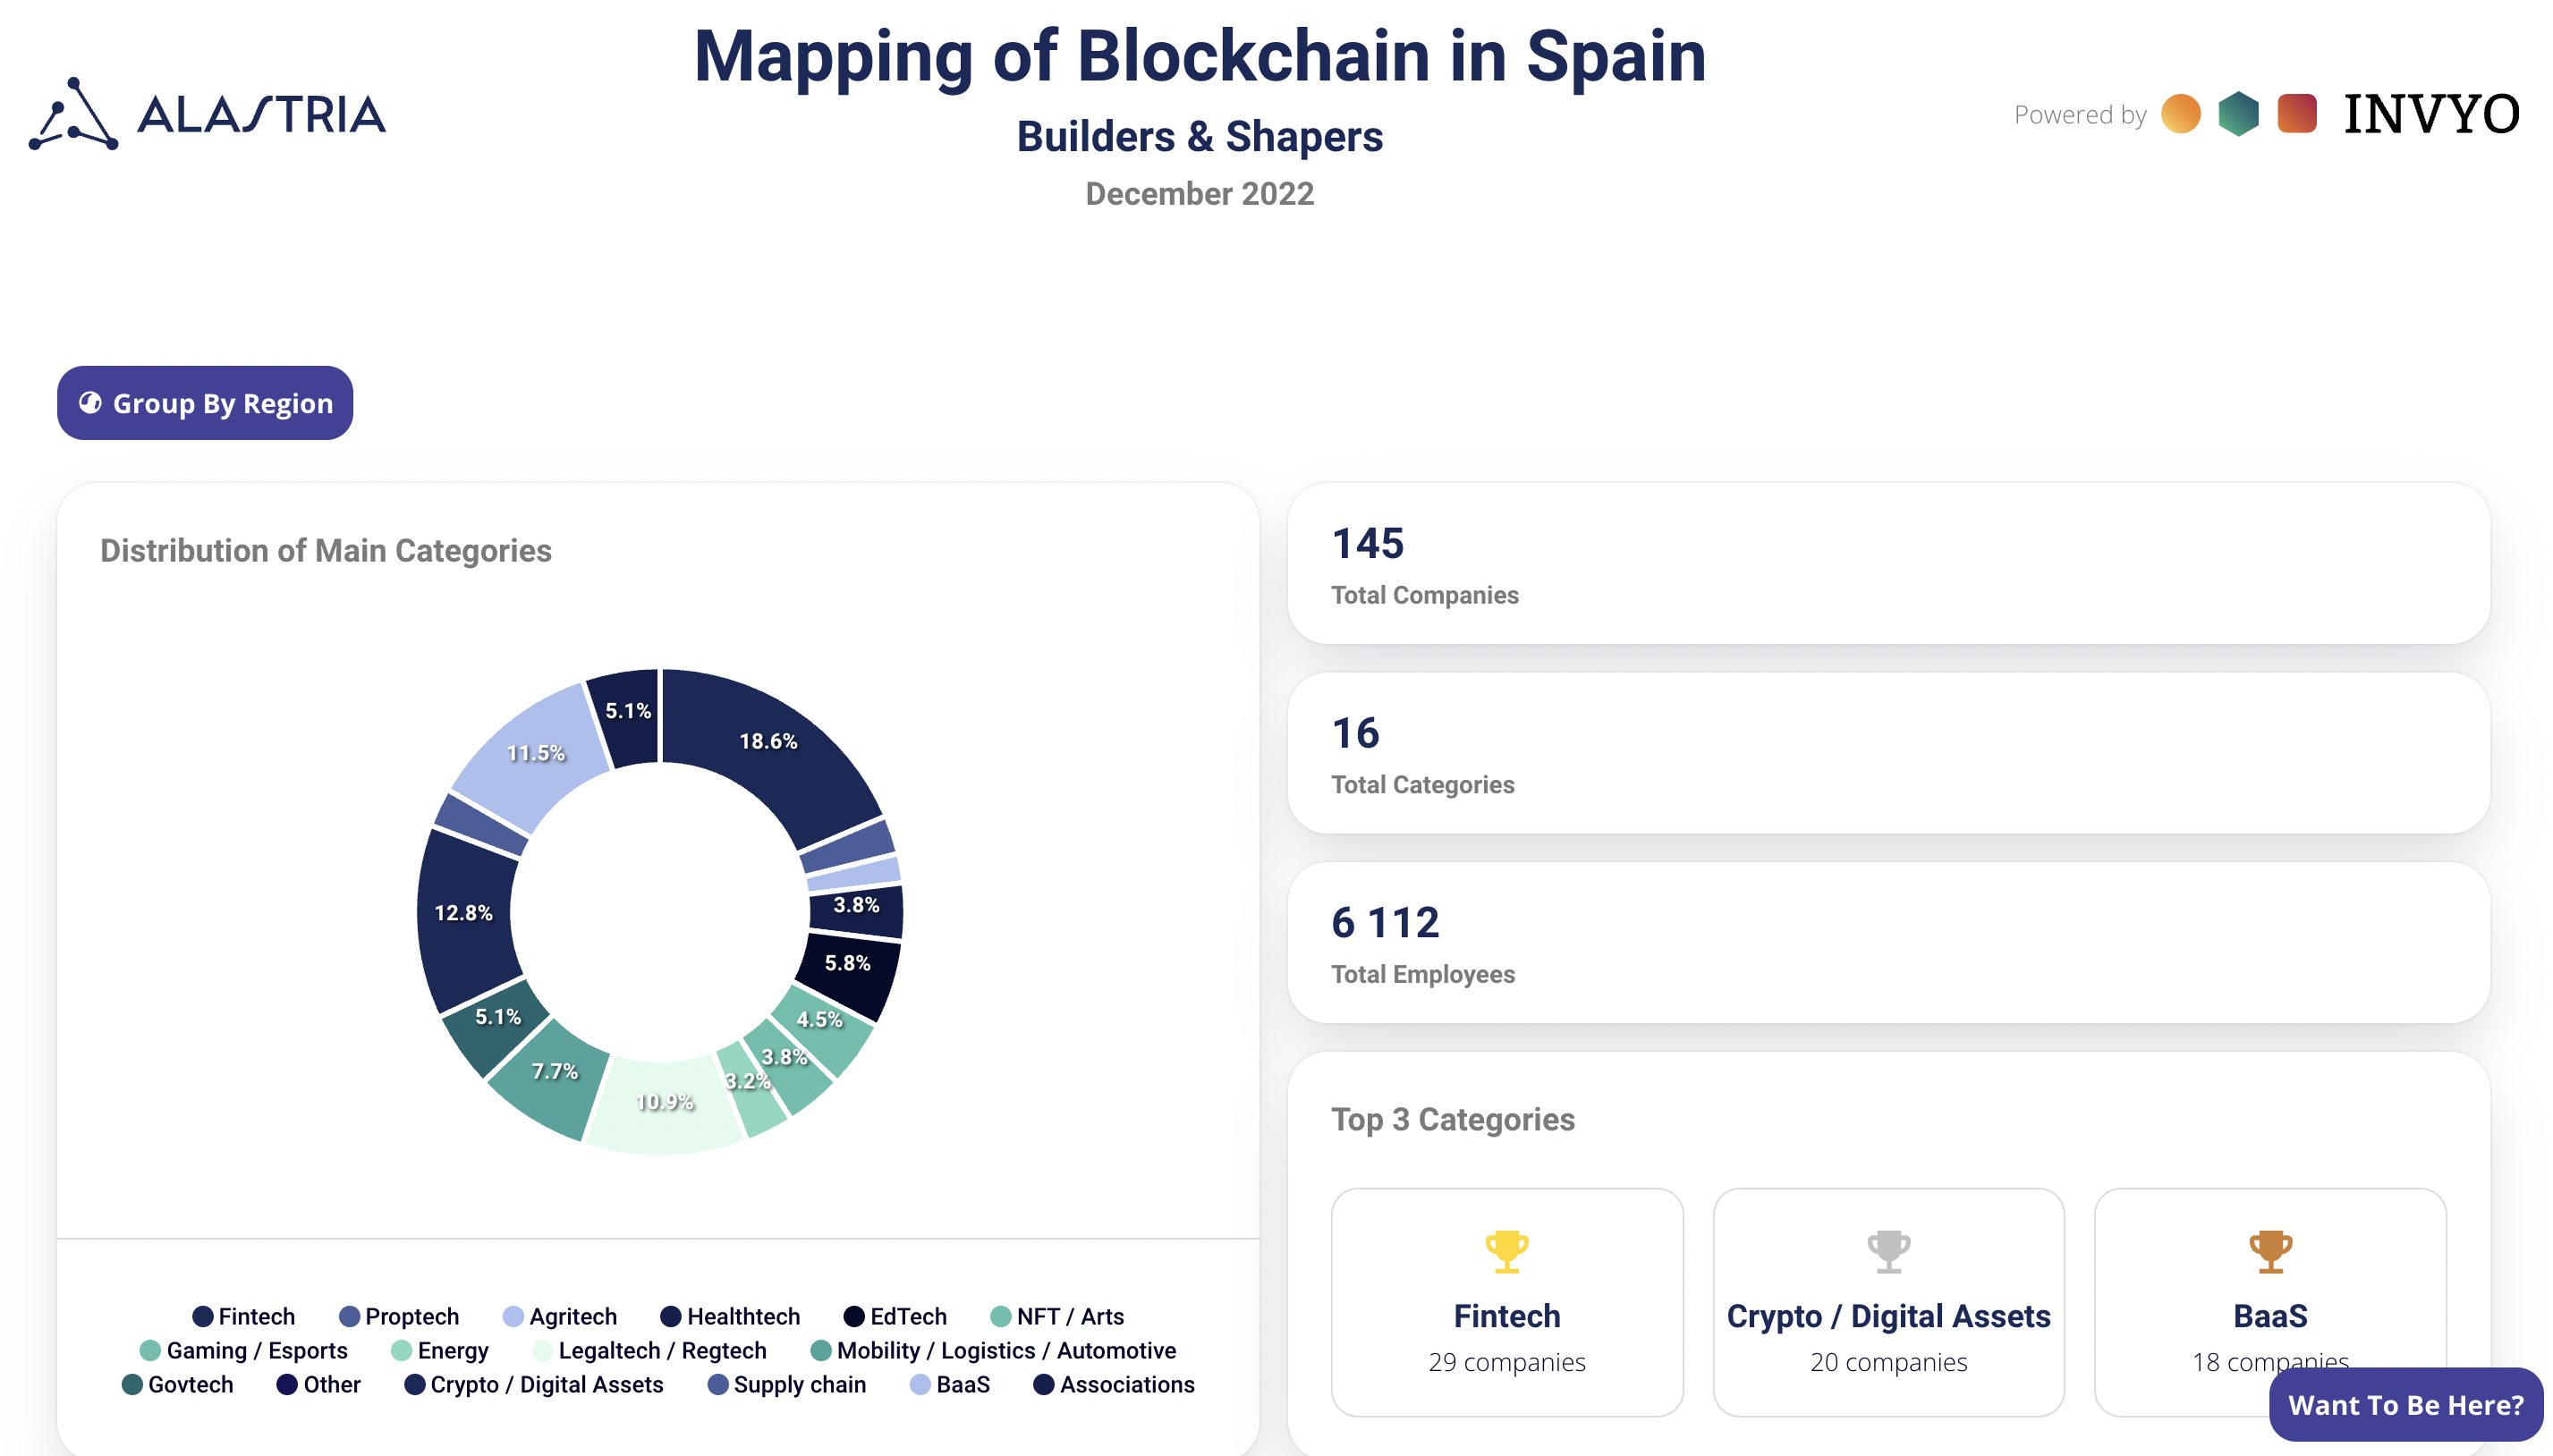 Alastria launches the first Blockchain Map in Spain